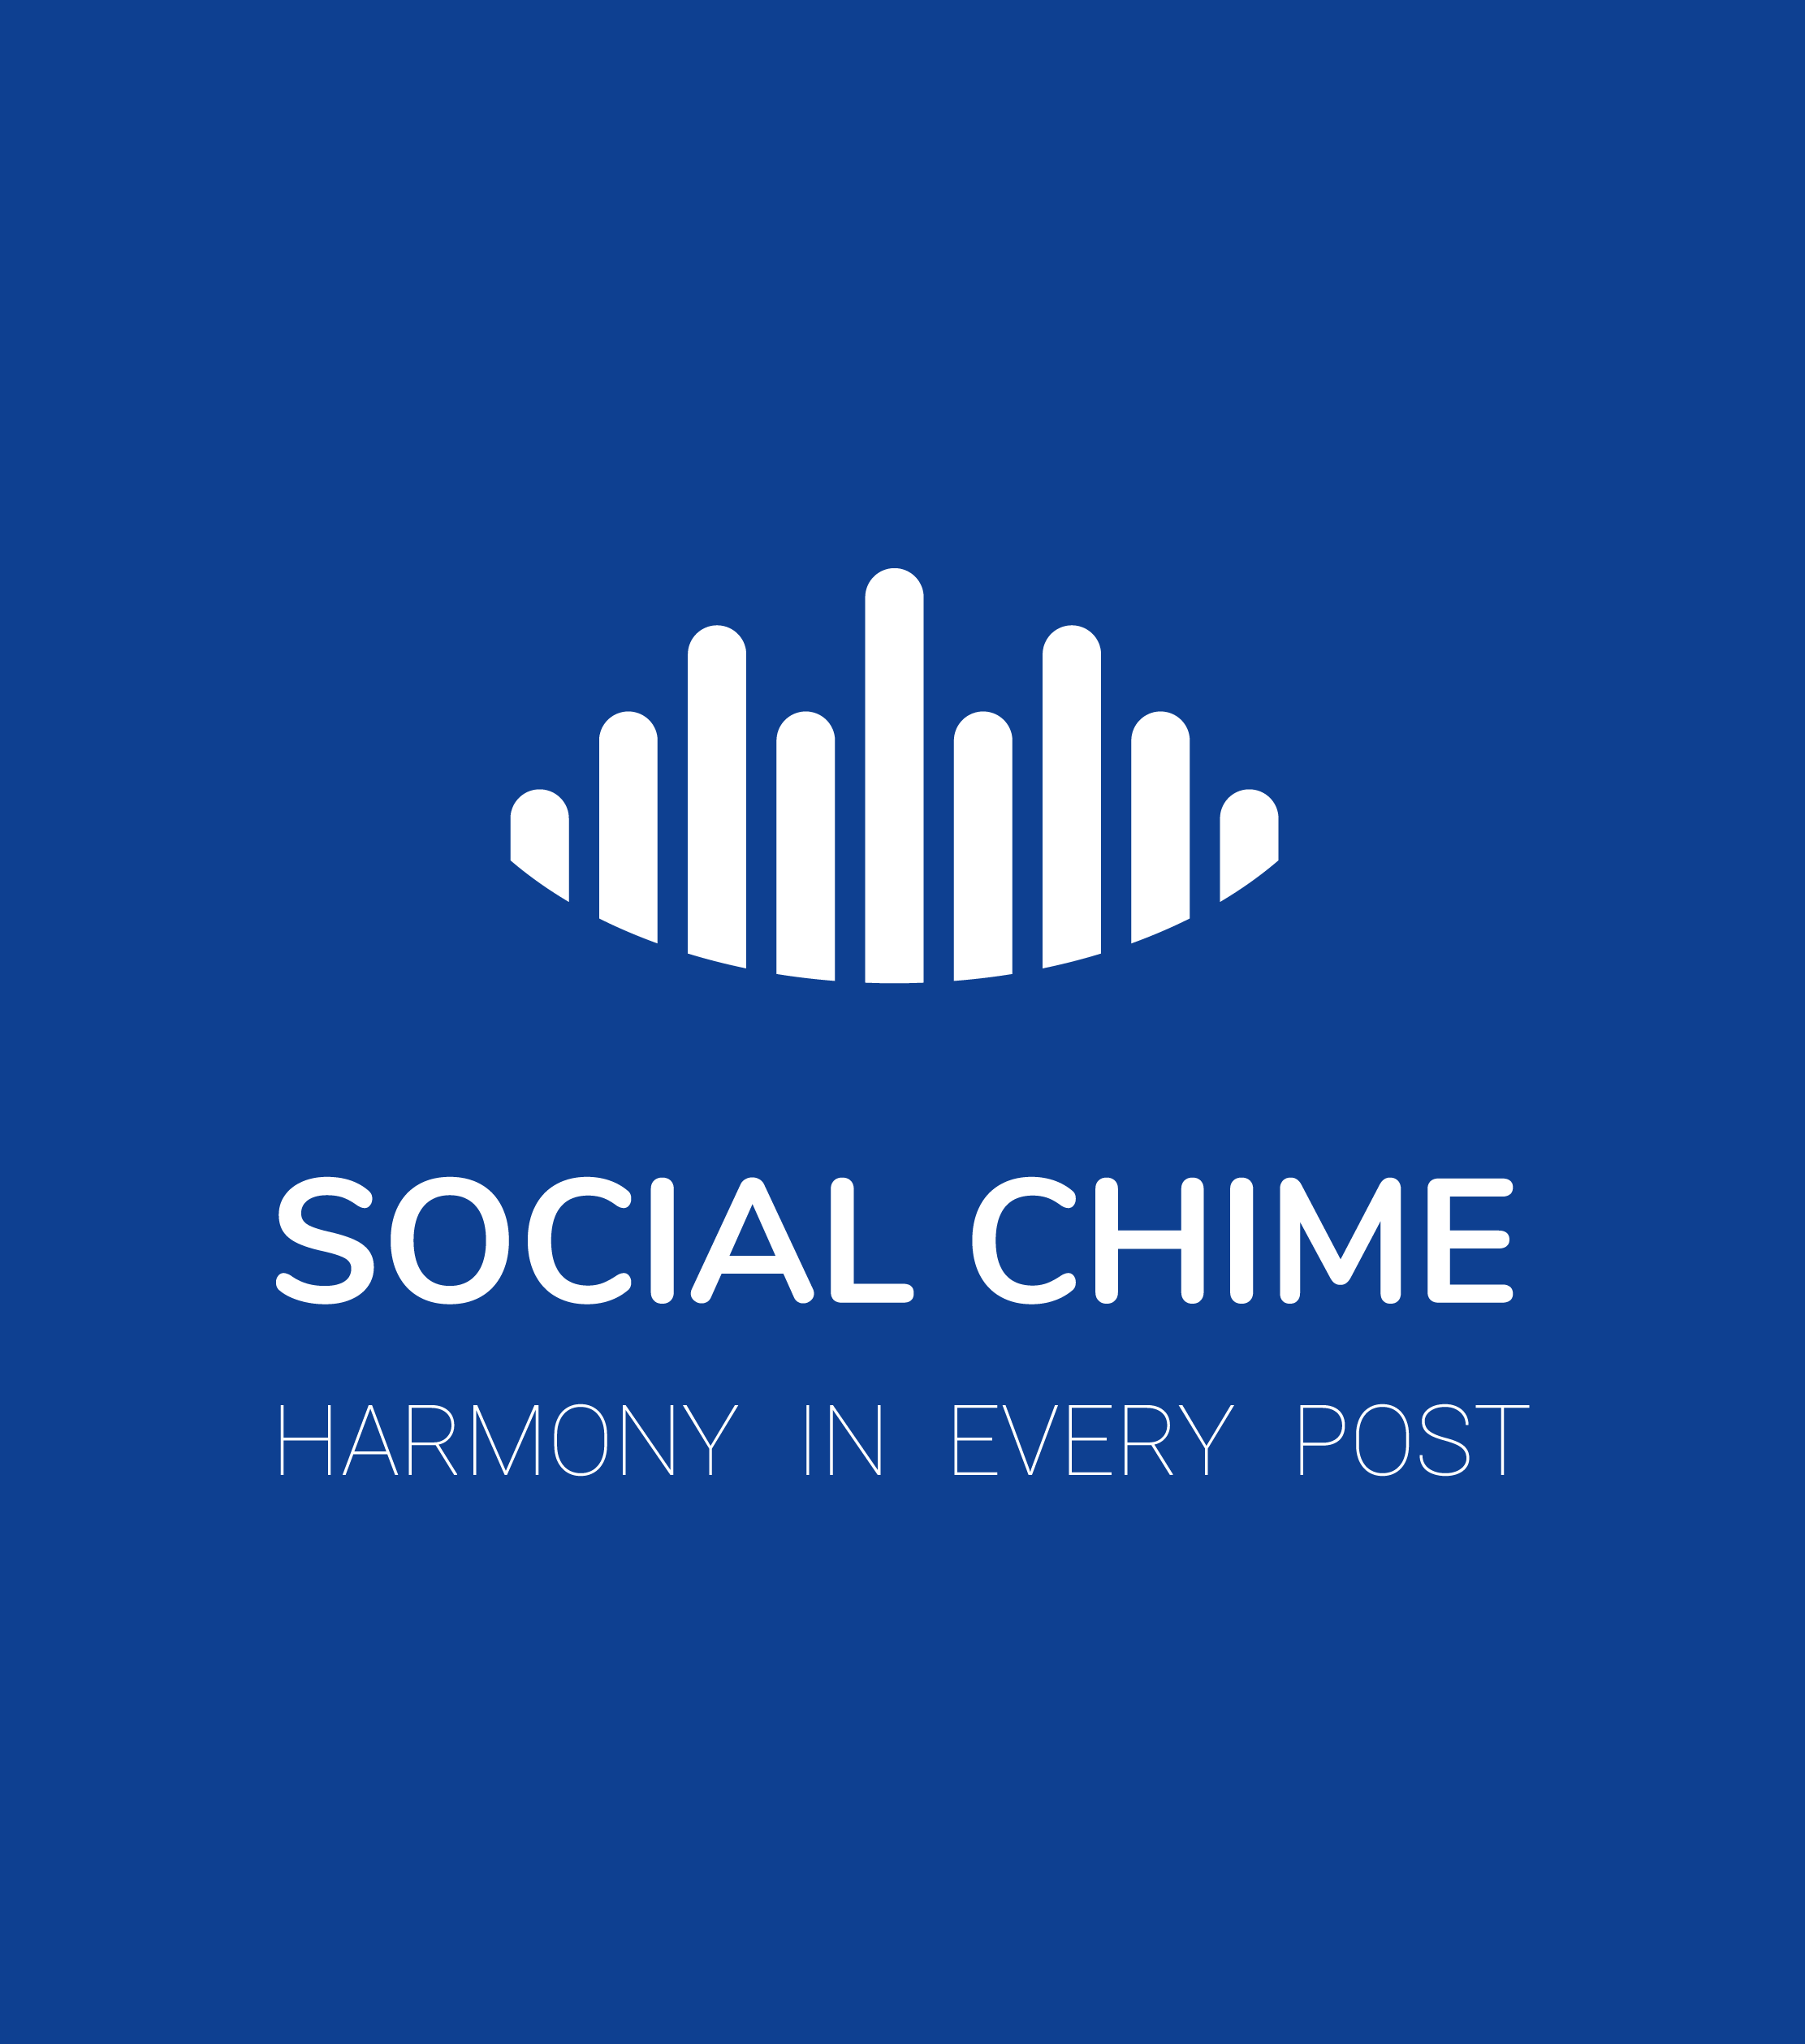 Ten Time-Saving Tips for Social Media Managers Using Social Chime